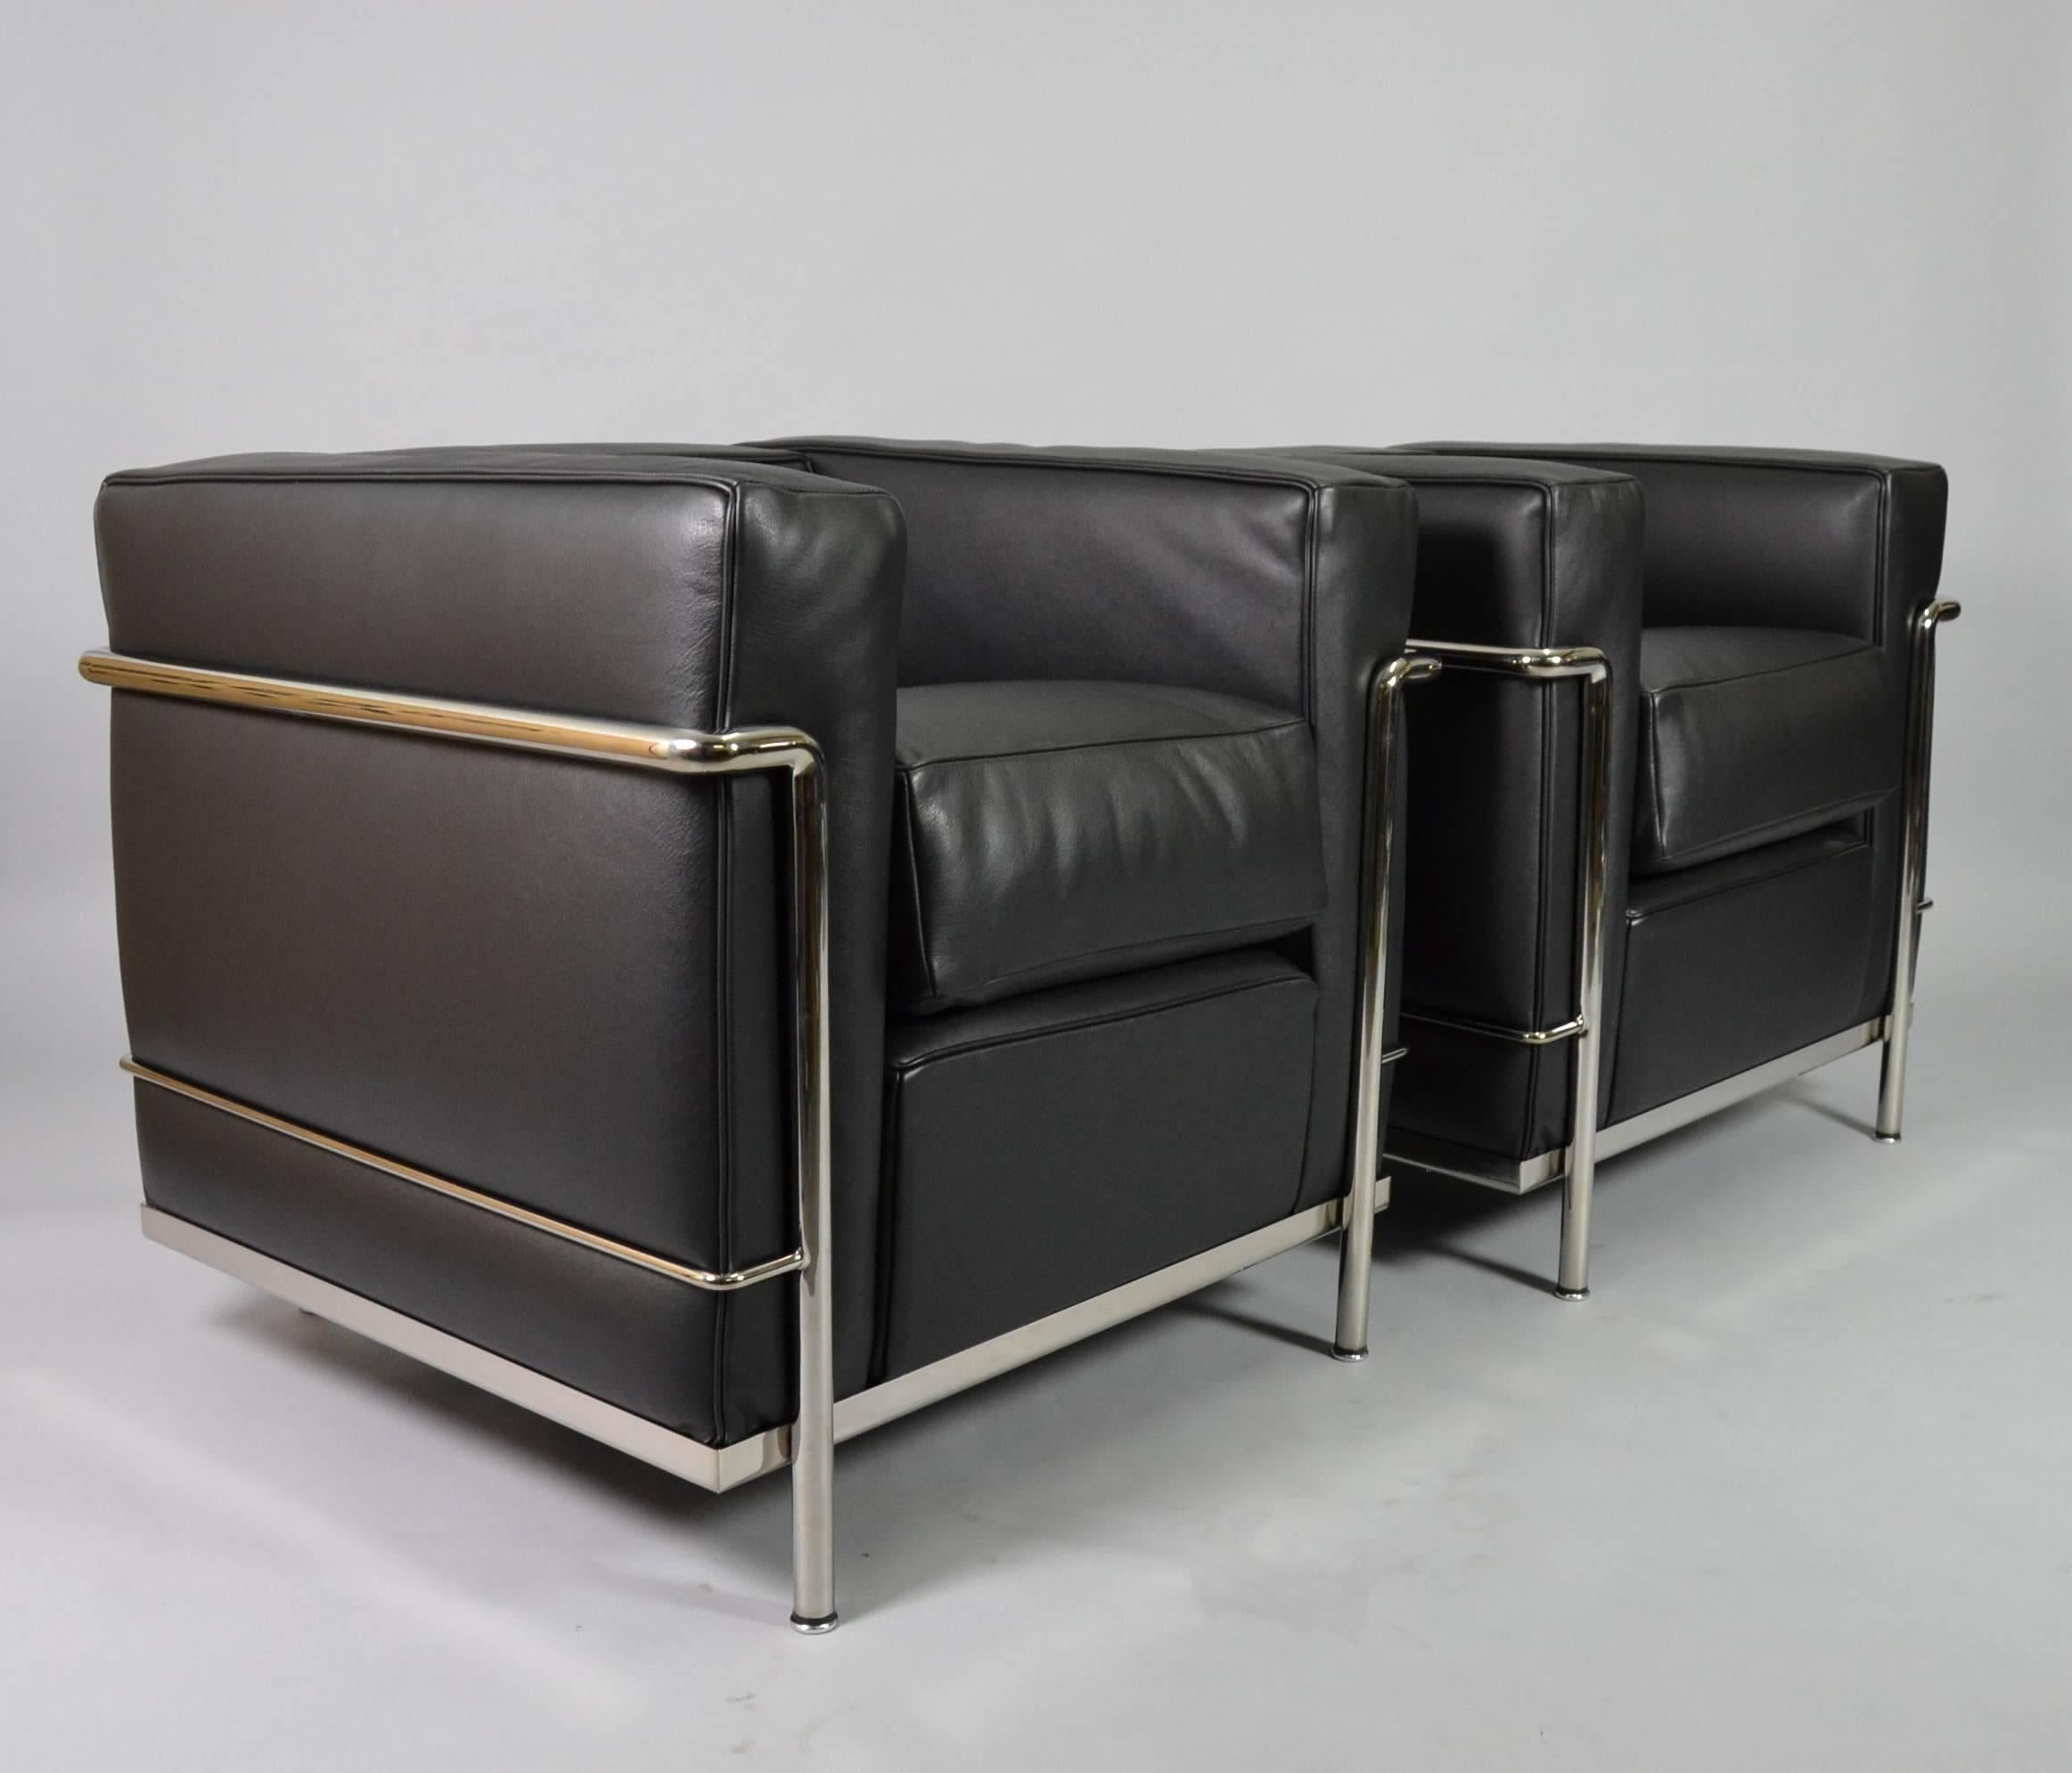 Designed by Le Corbusier, Pierre Jeanneret and Charlotte Perriand in 1928. Produced and signed by Cassina. Stainless steel with cushions in black leather.